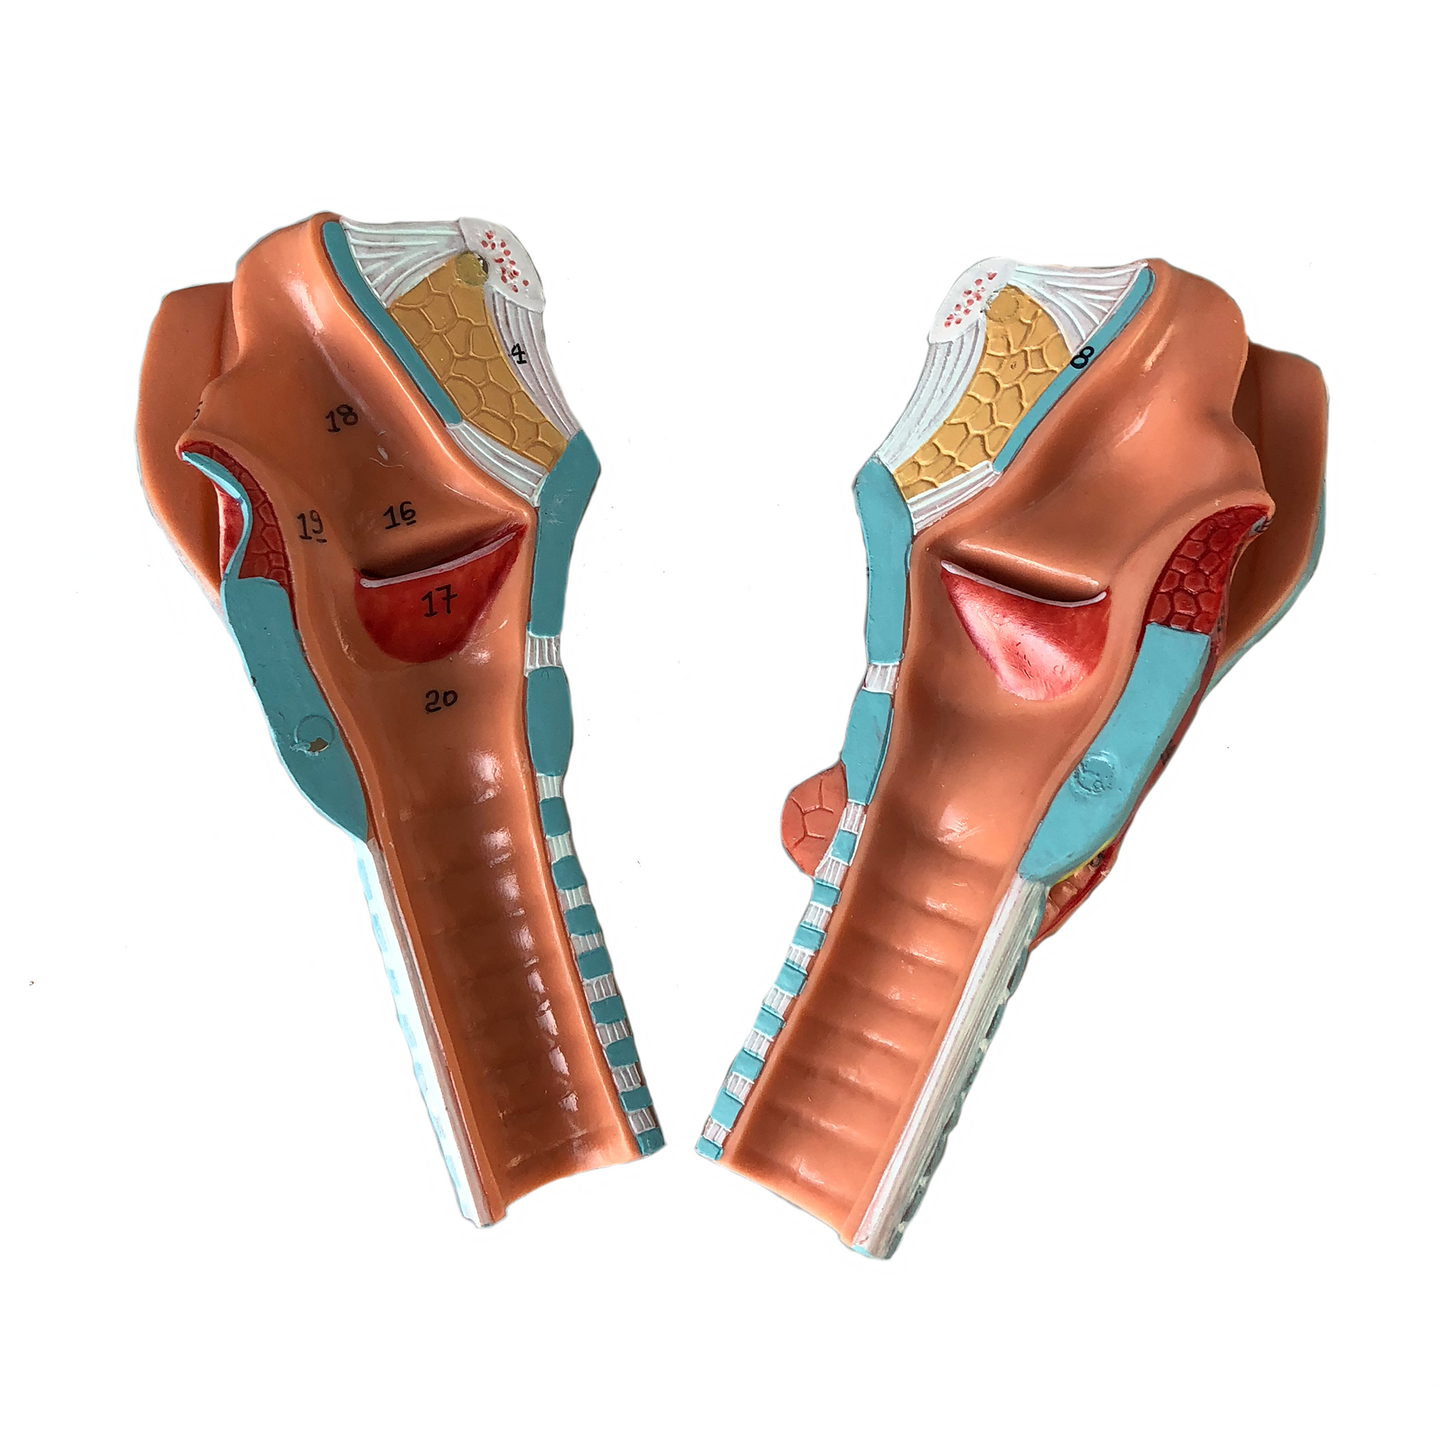 Larynx model with vocal folds and several other tissues. Can be separated into 5 parts